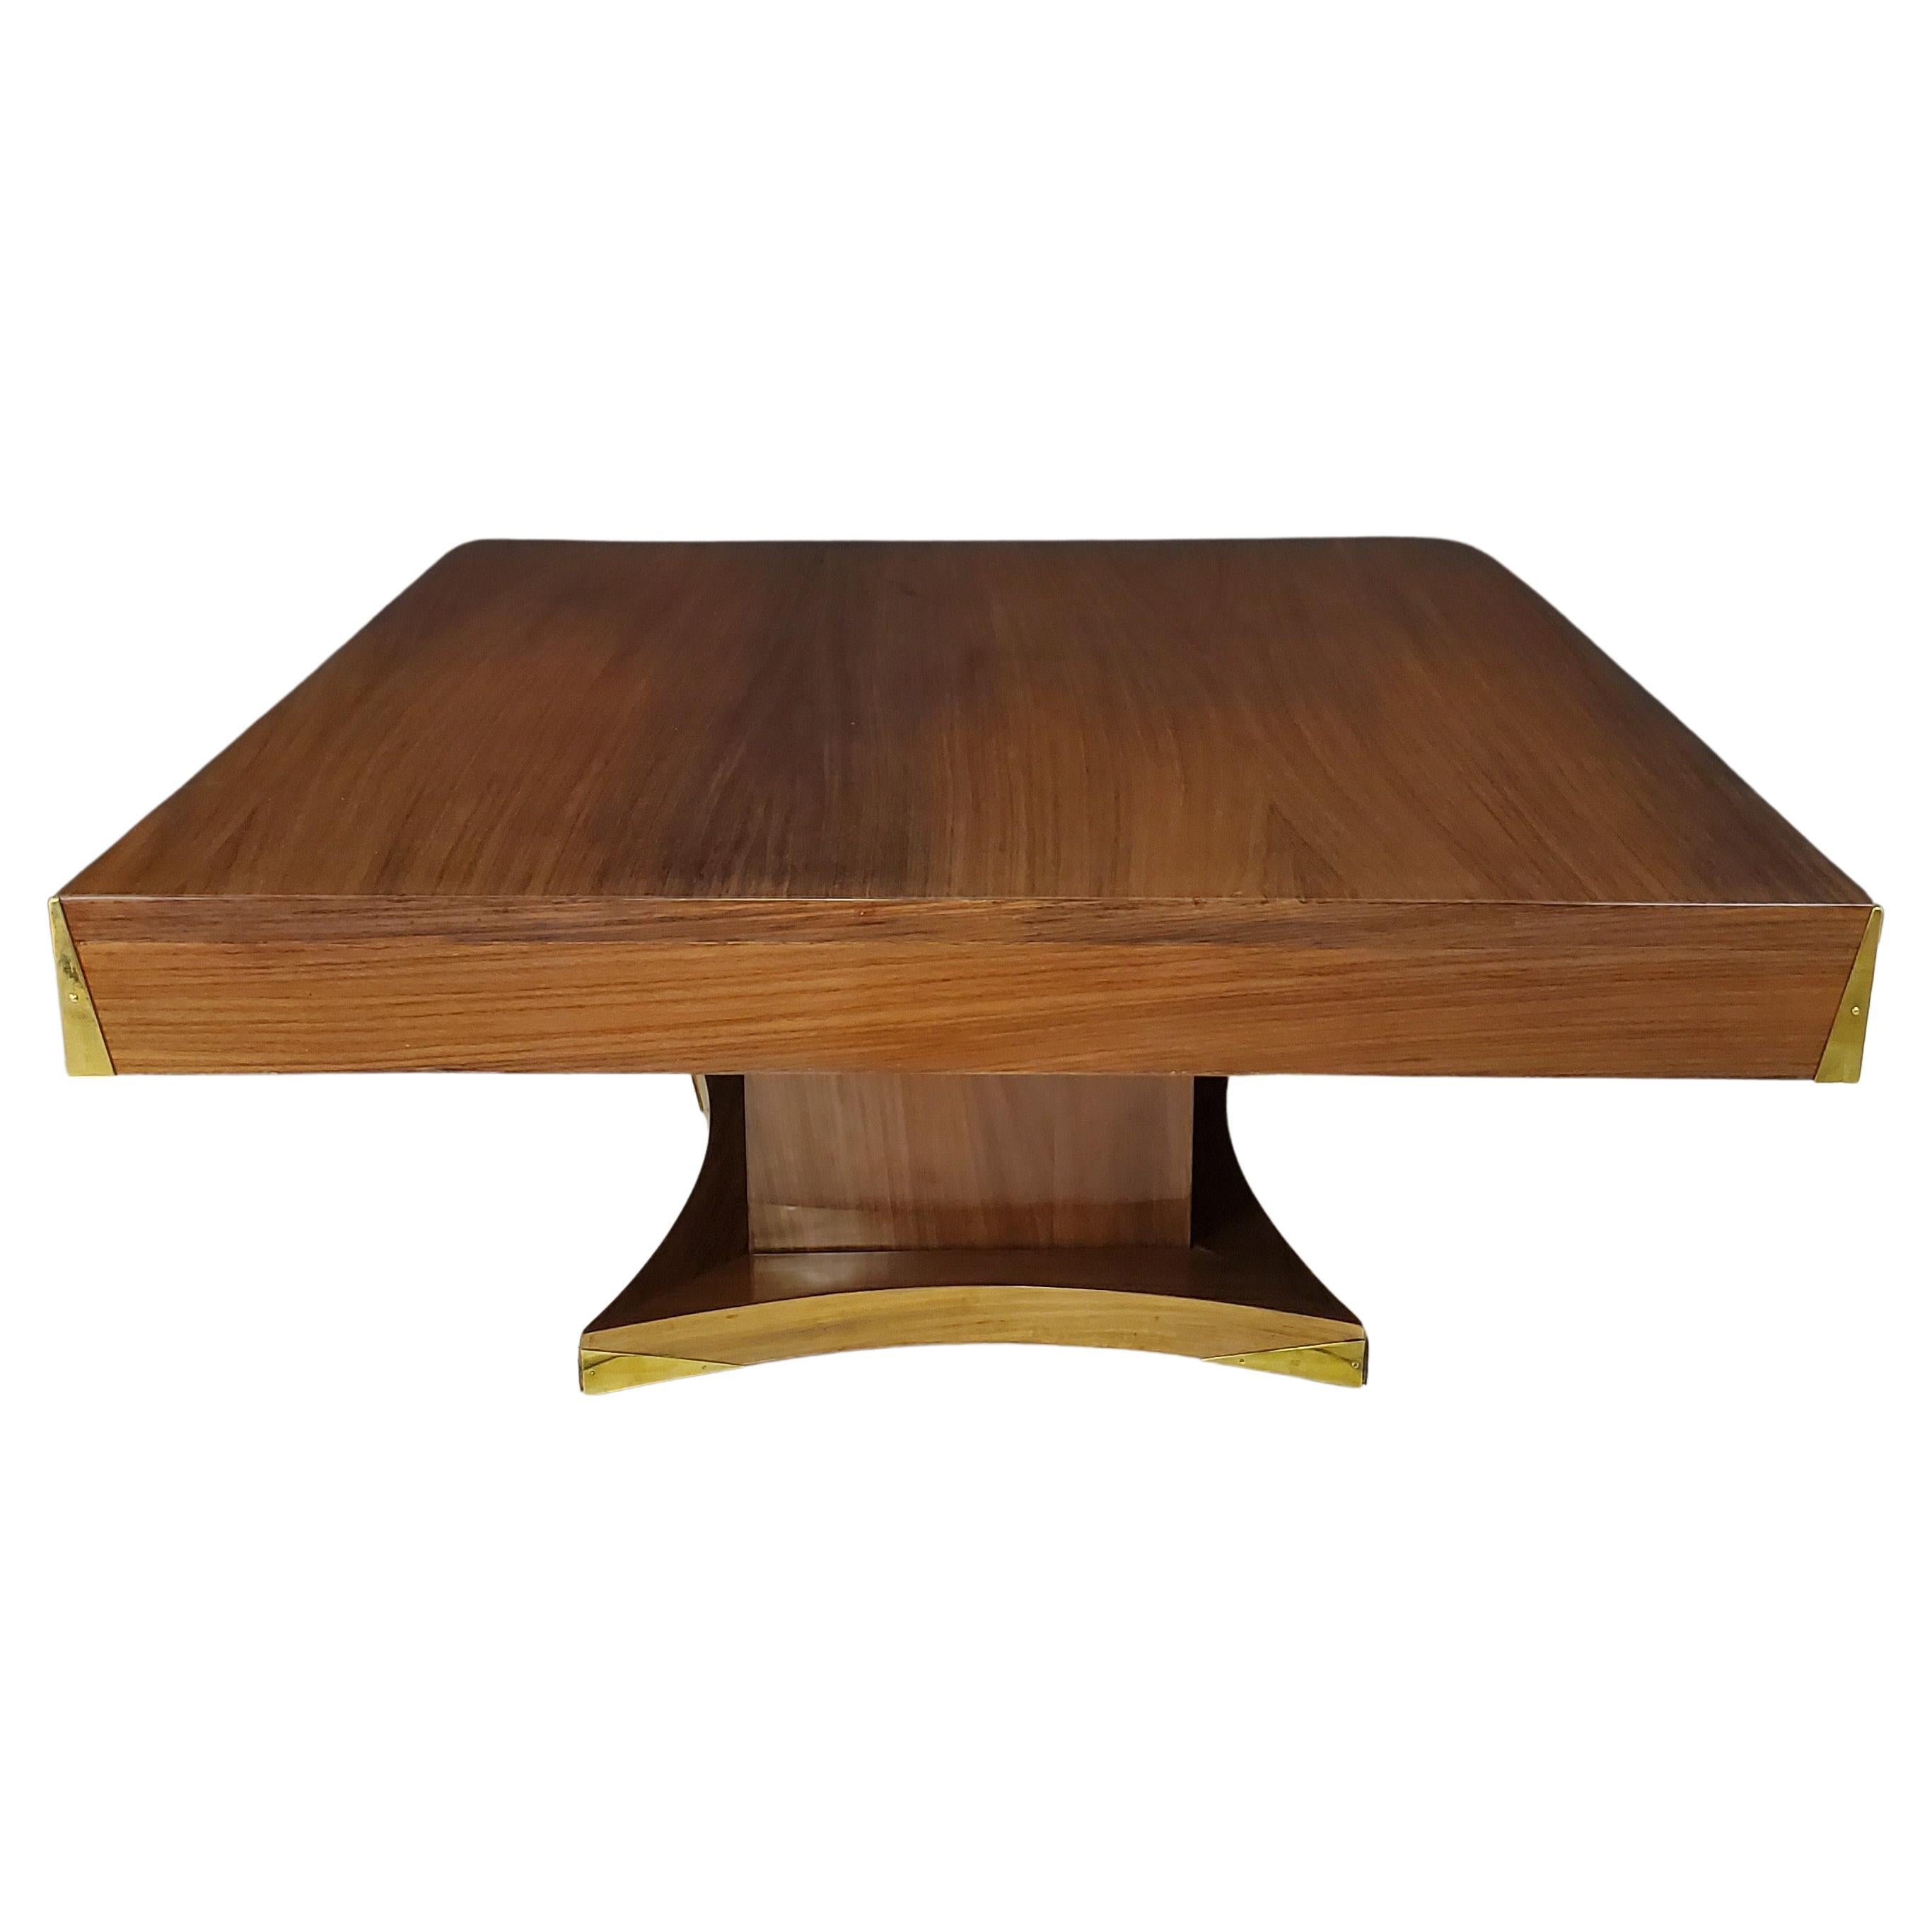 Large Square French Modernist Coffee Table in Palisander with Brass Corner Tips